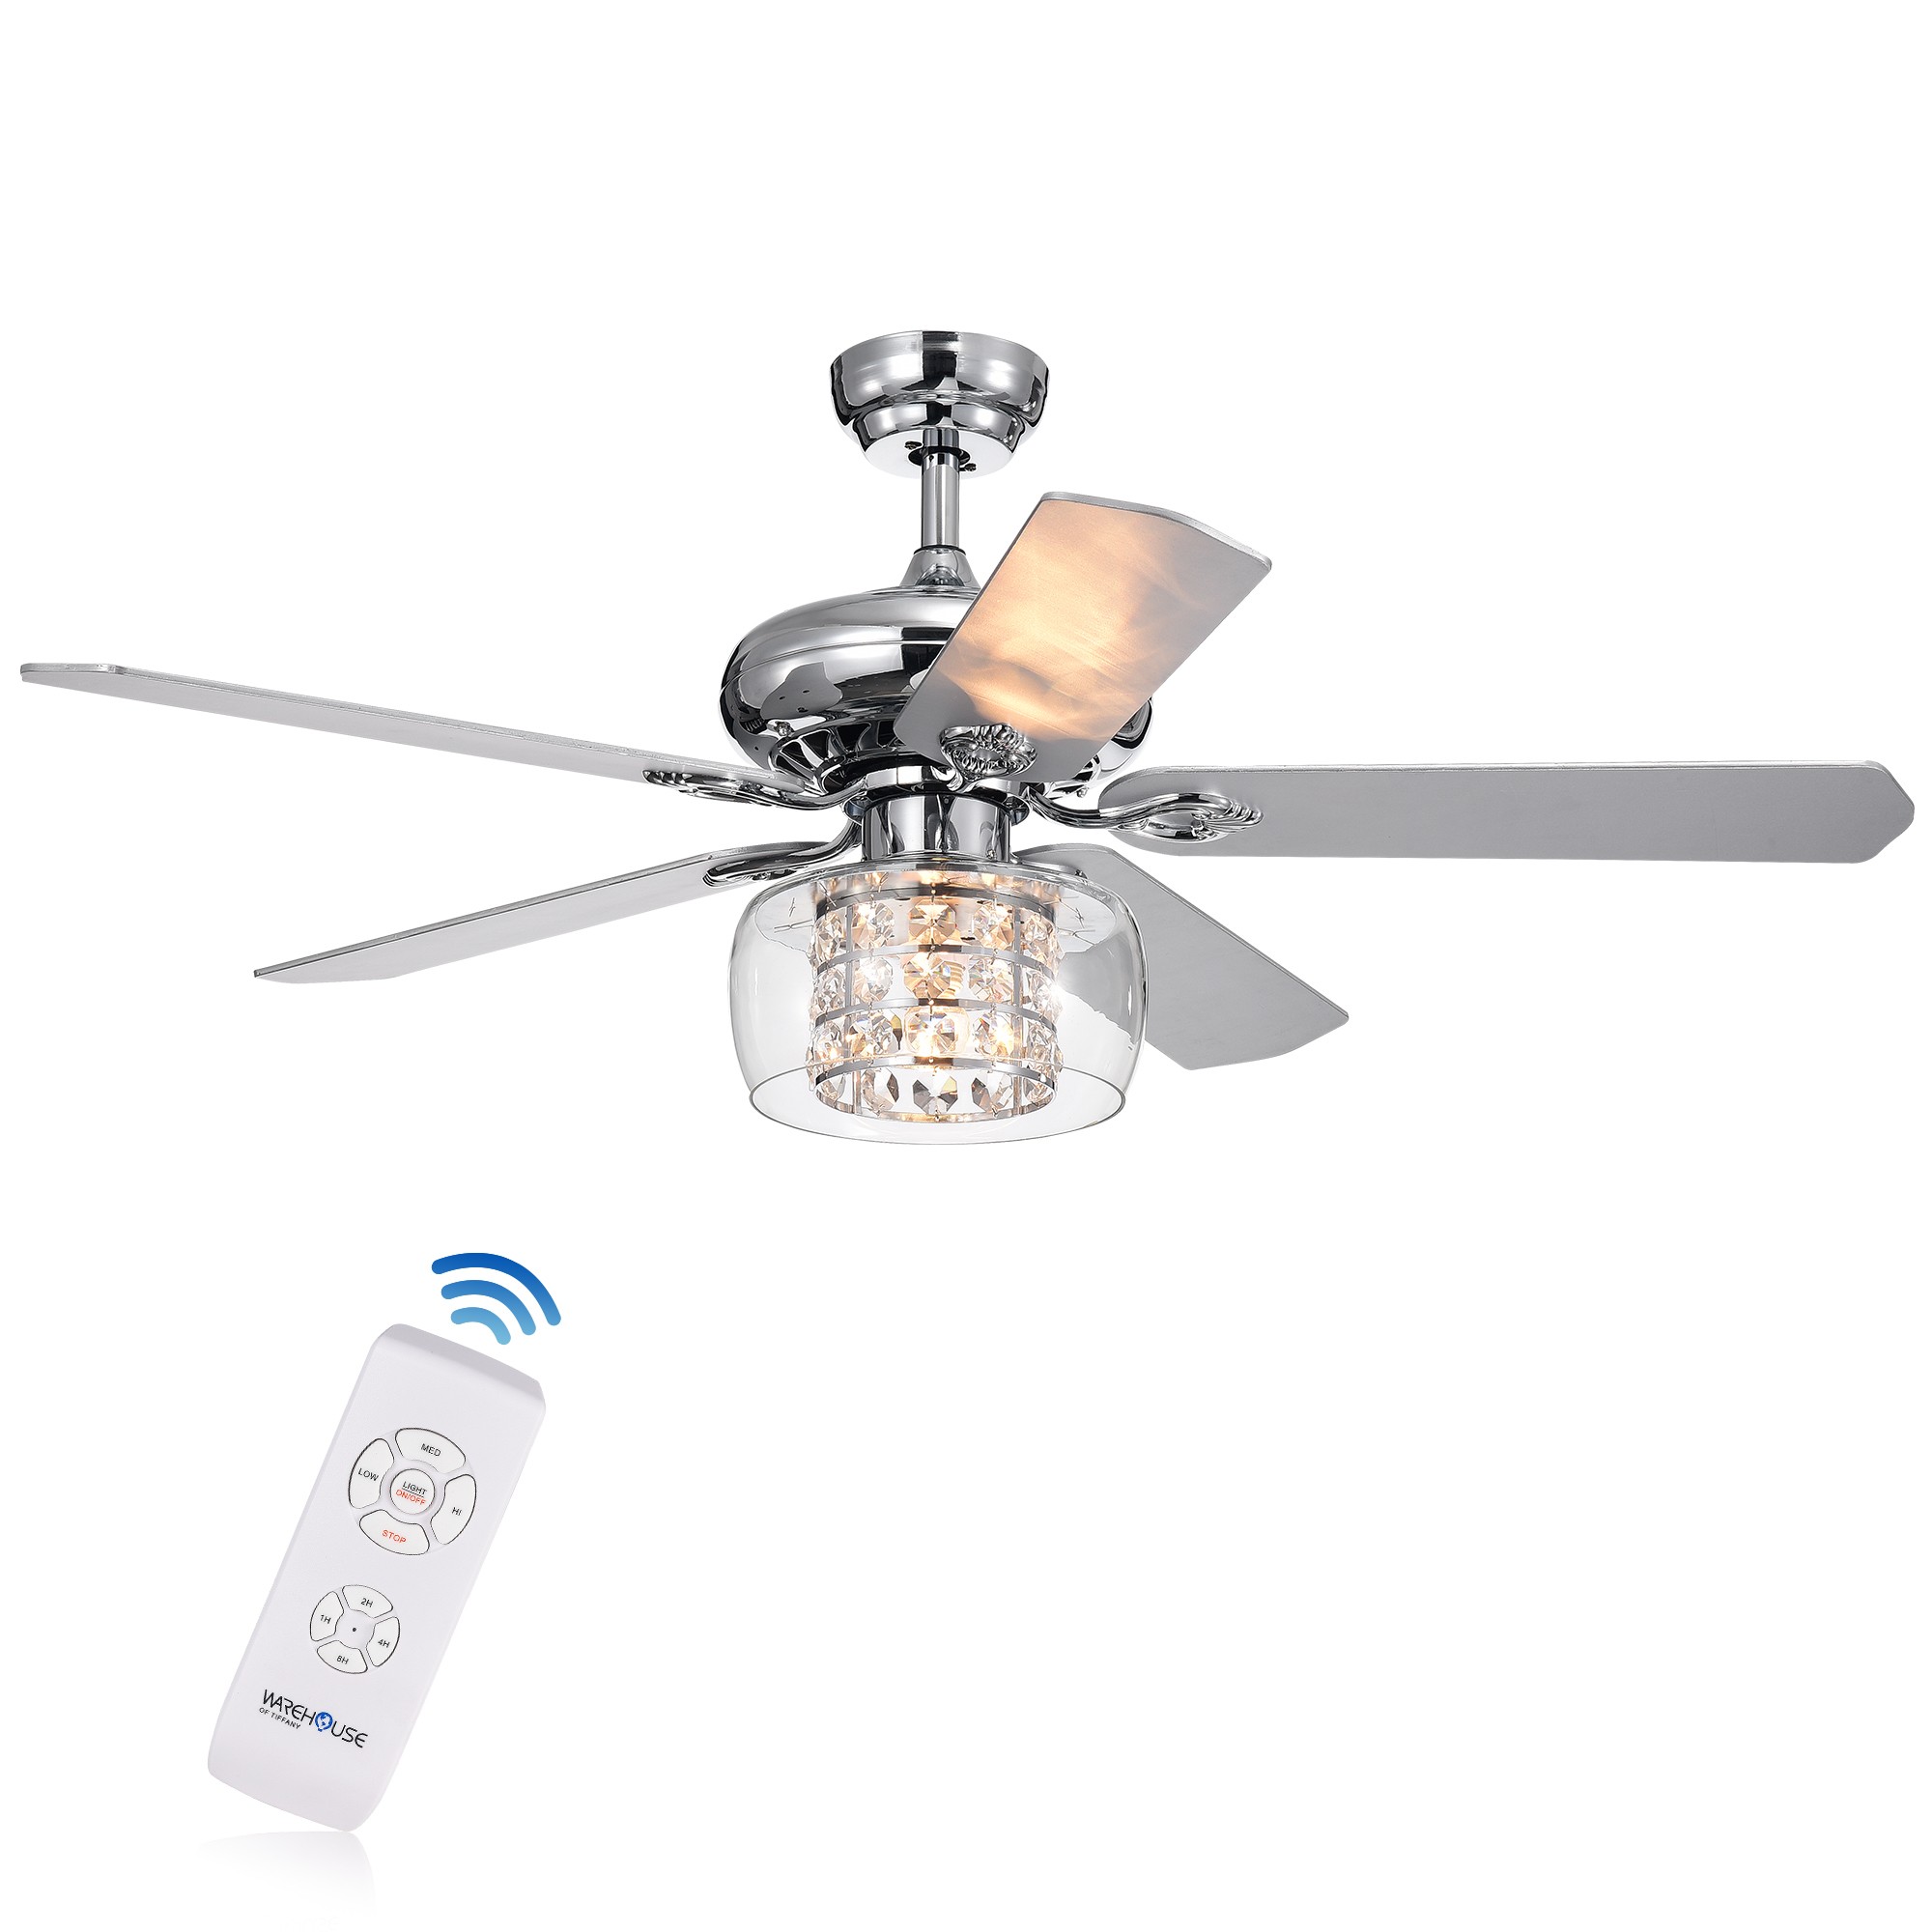 Cayten 5-Blade 52-Inch Chrome Lighted Ceiling Fans with Crystal Shade (Remote Controlled)